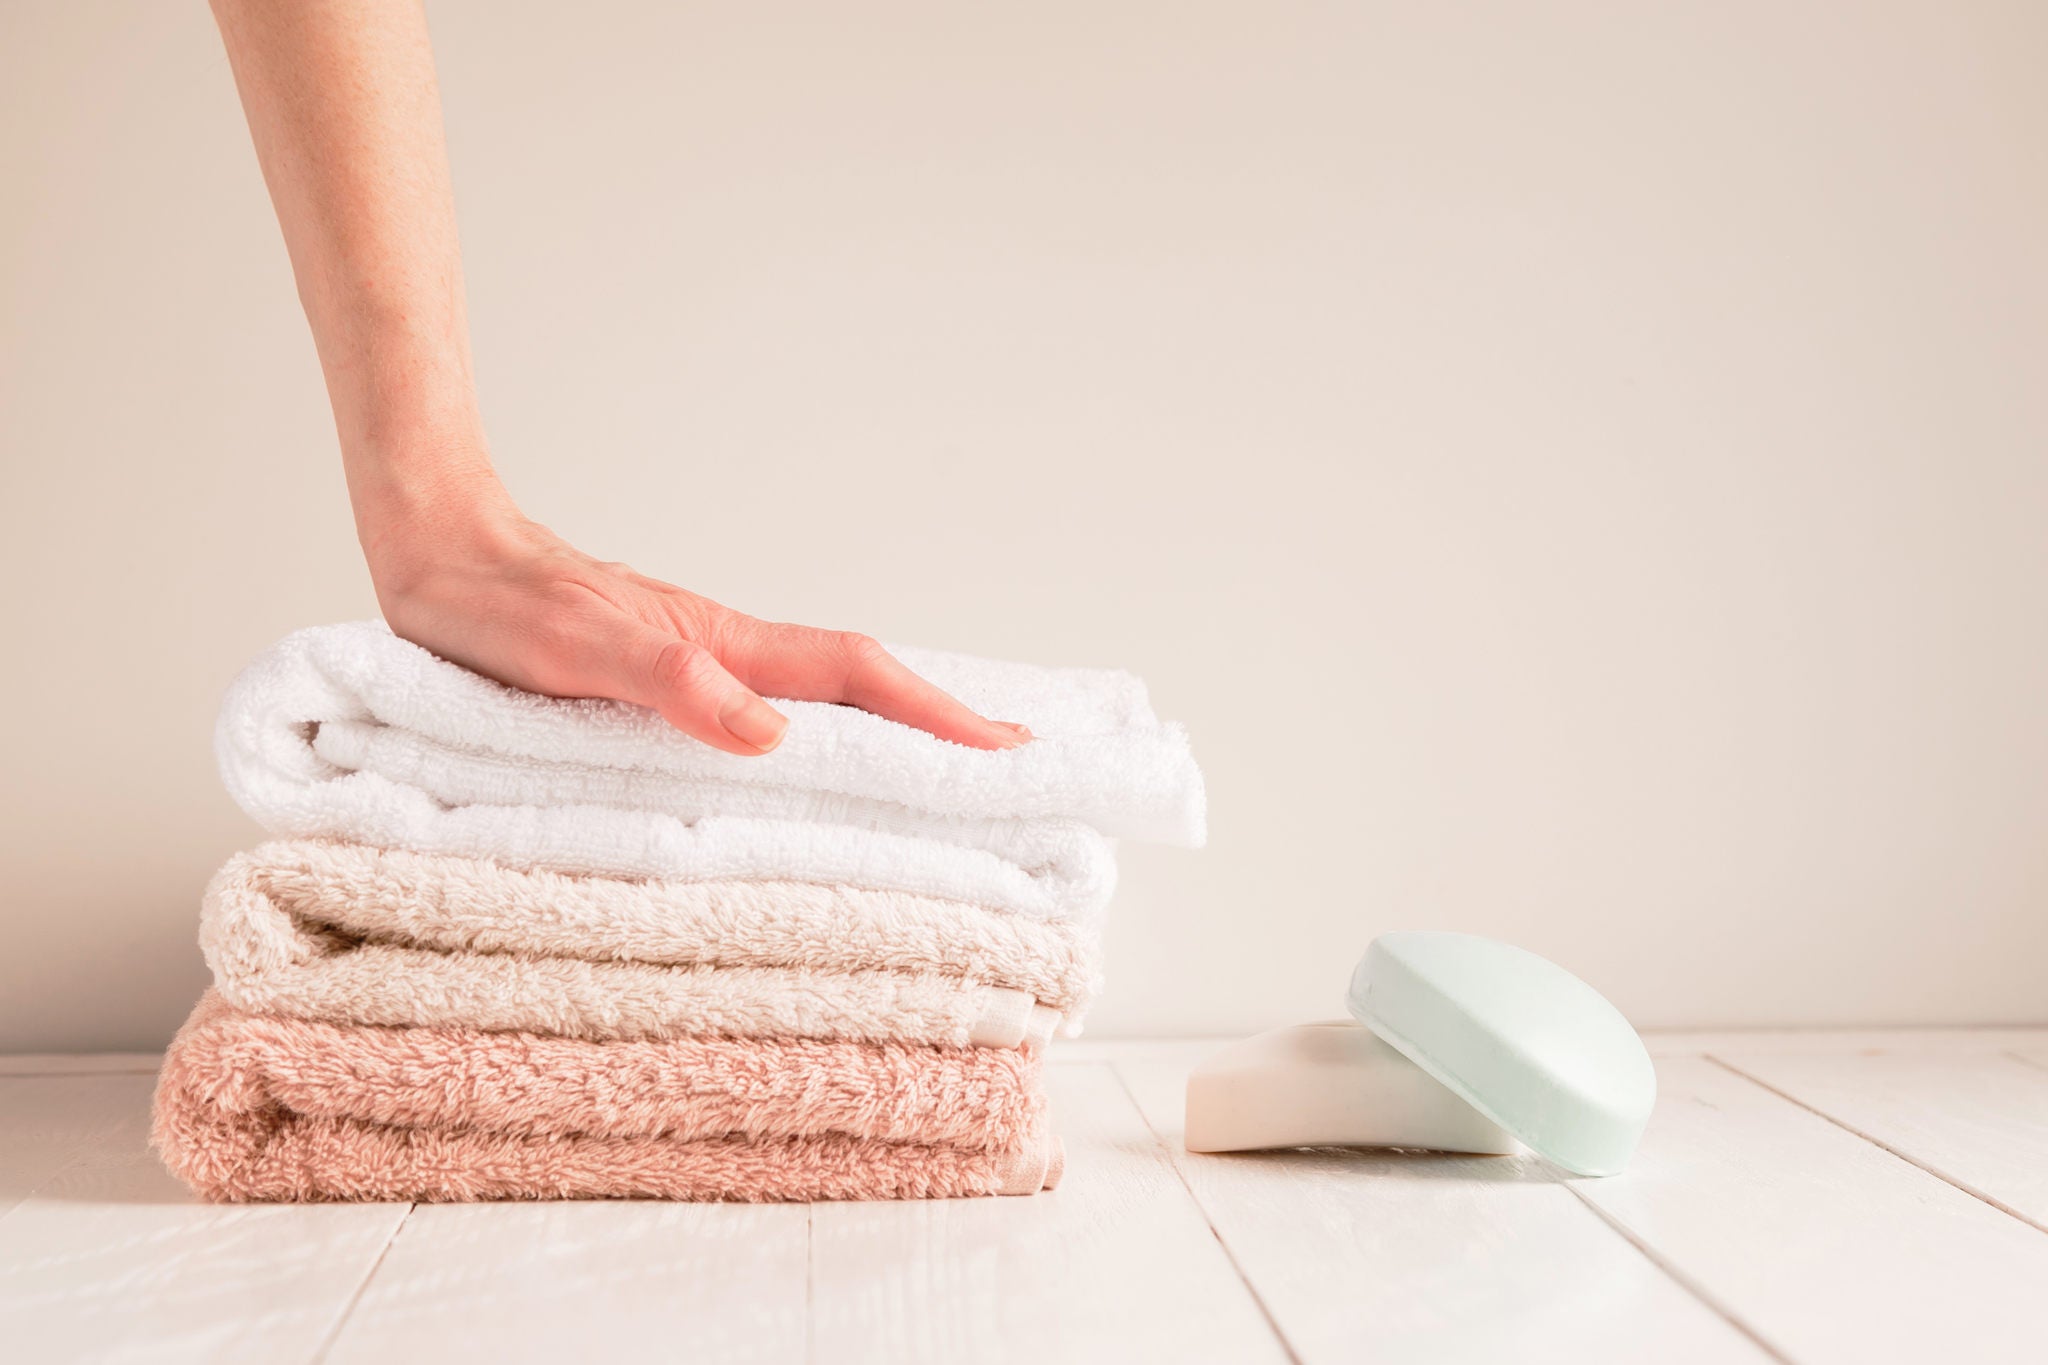 Bath Sheets vs Towels: What's The Difference?